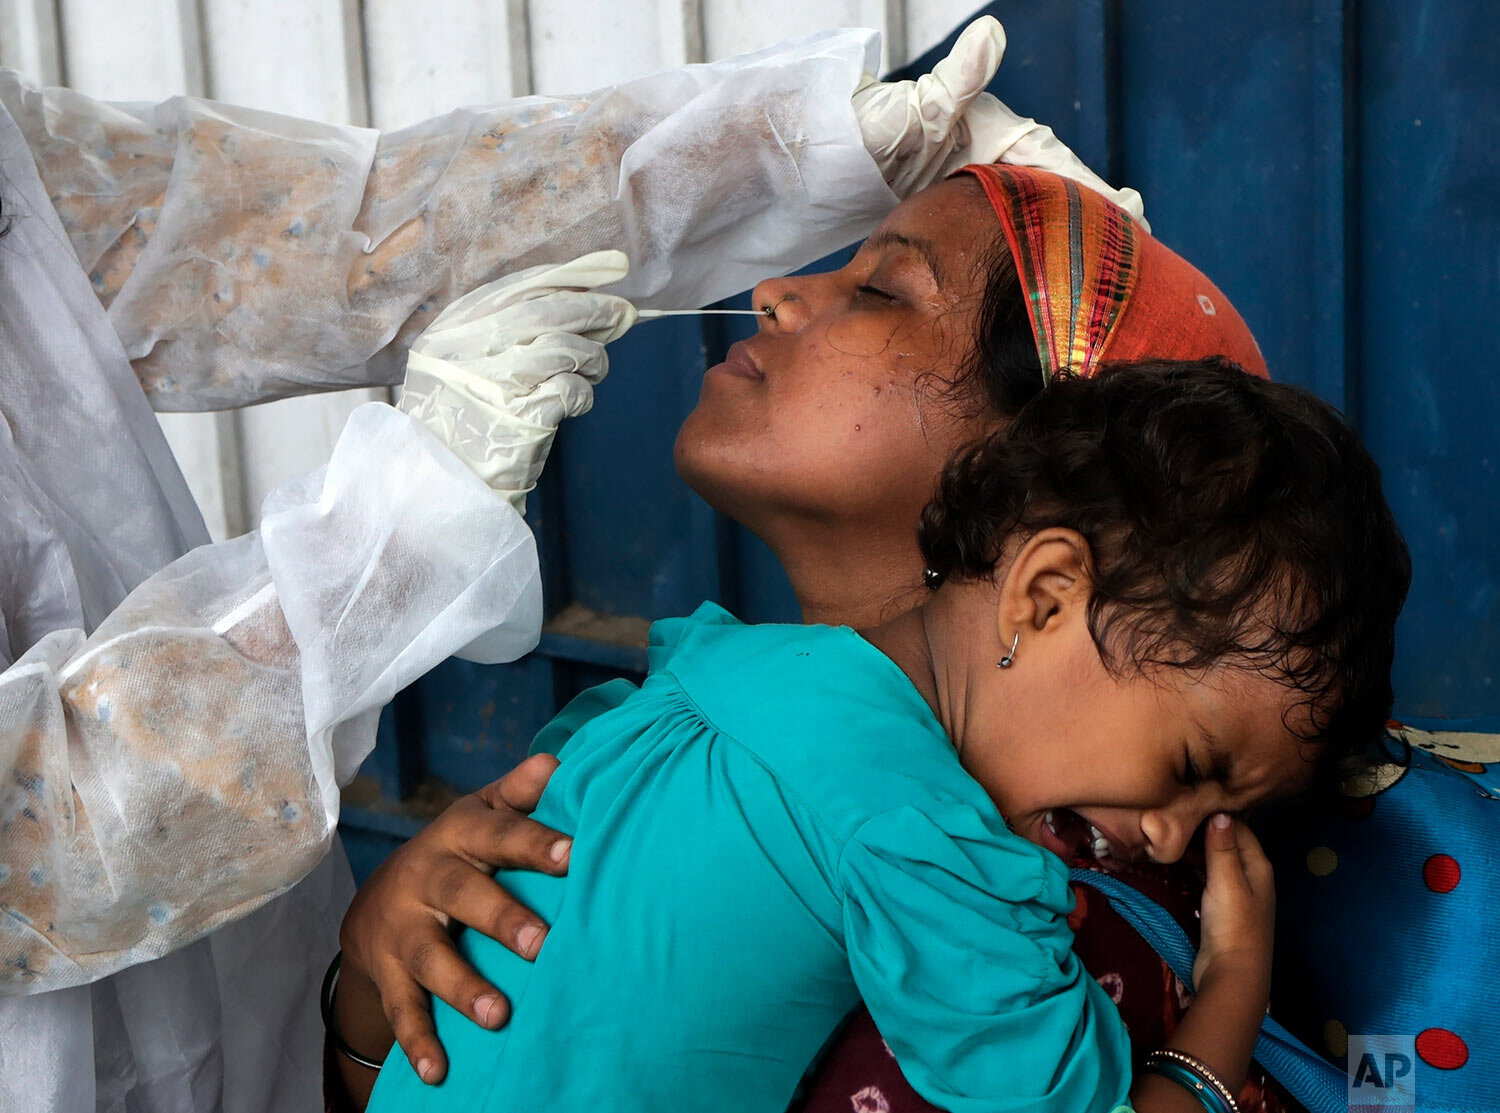  A health worker collects swab sample of traveler to test for COVID-19 at a train station in Mumbai, India, Thursday, June 17, 2021. (AP Photo/Rajanish Kakade) 